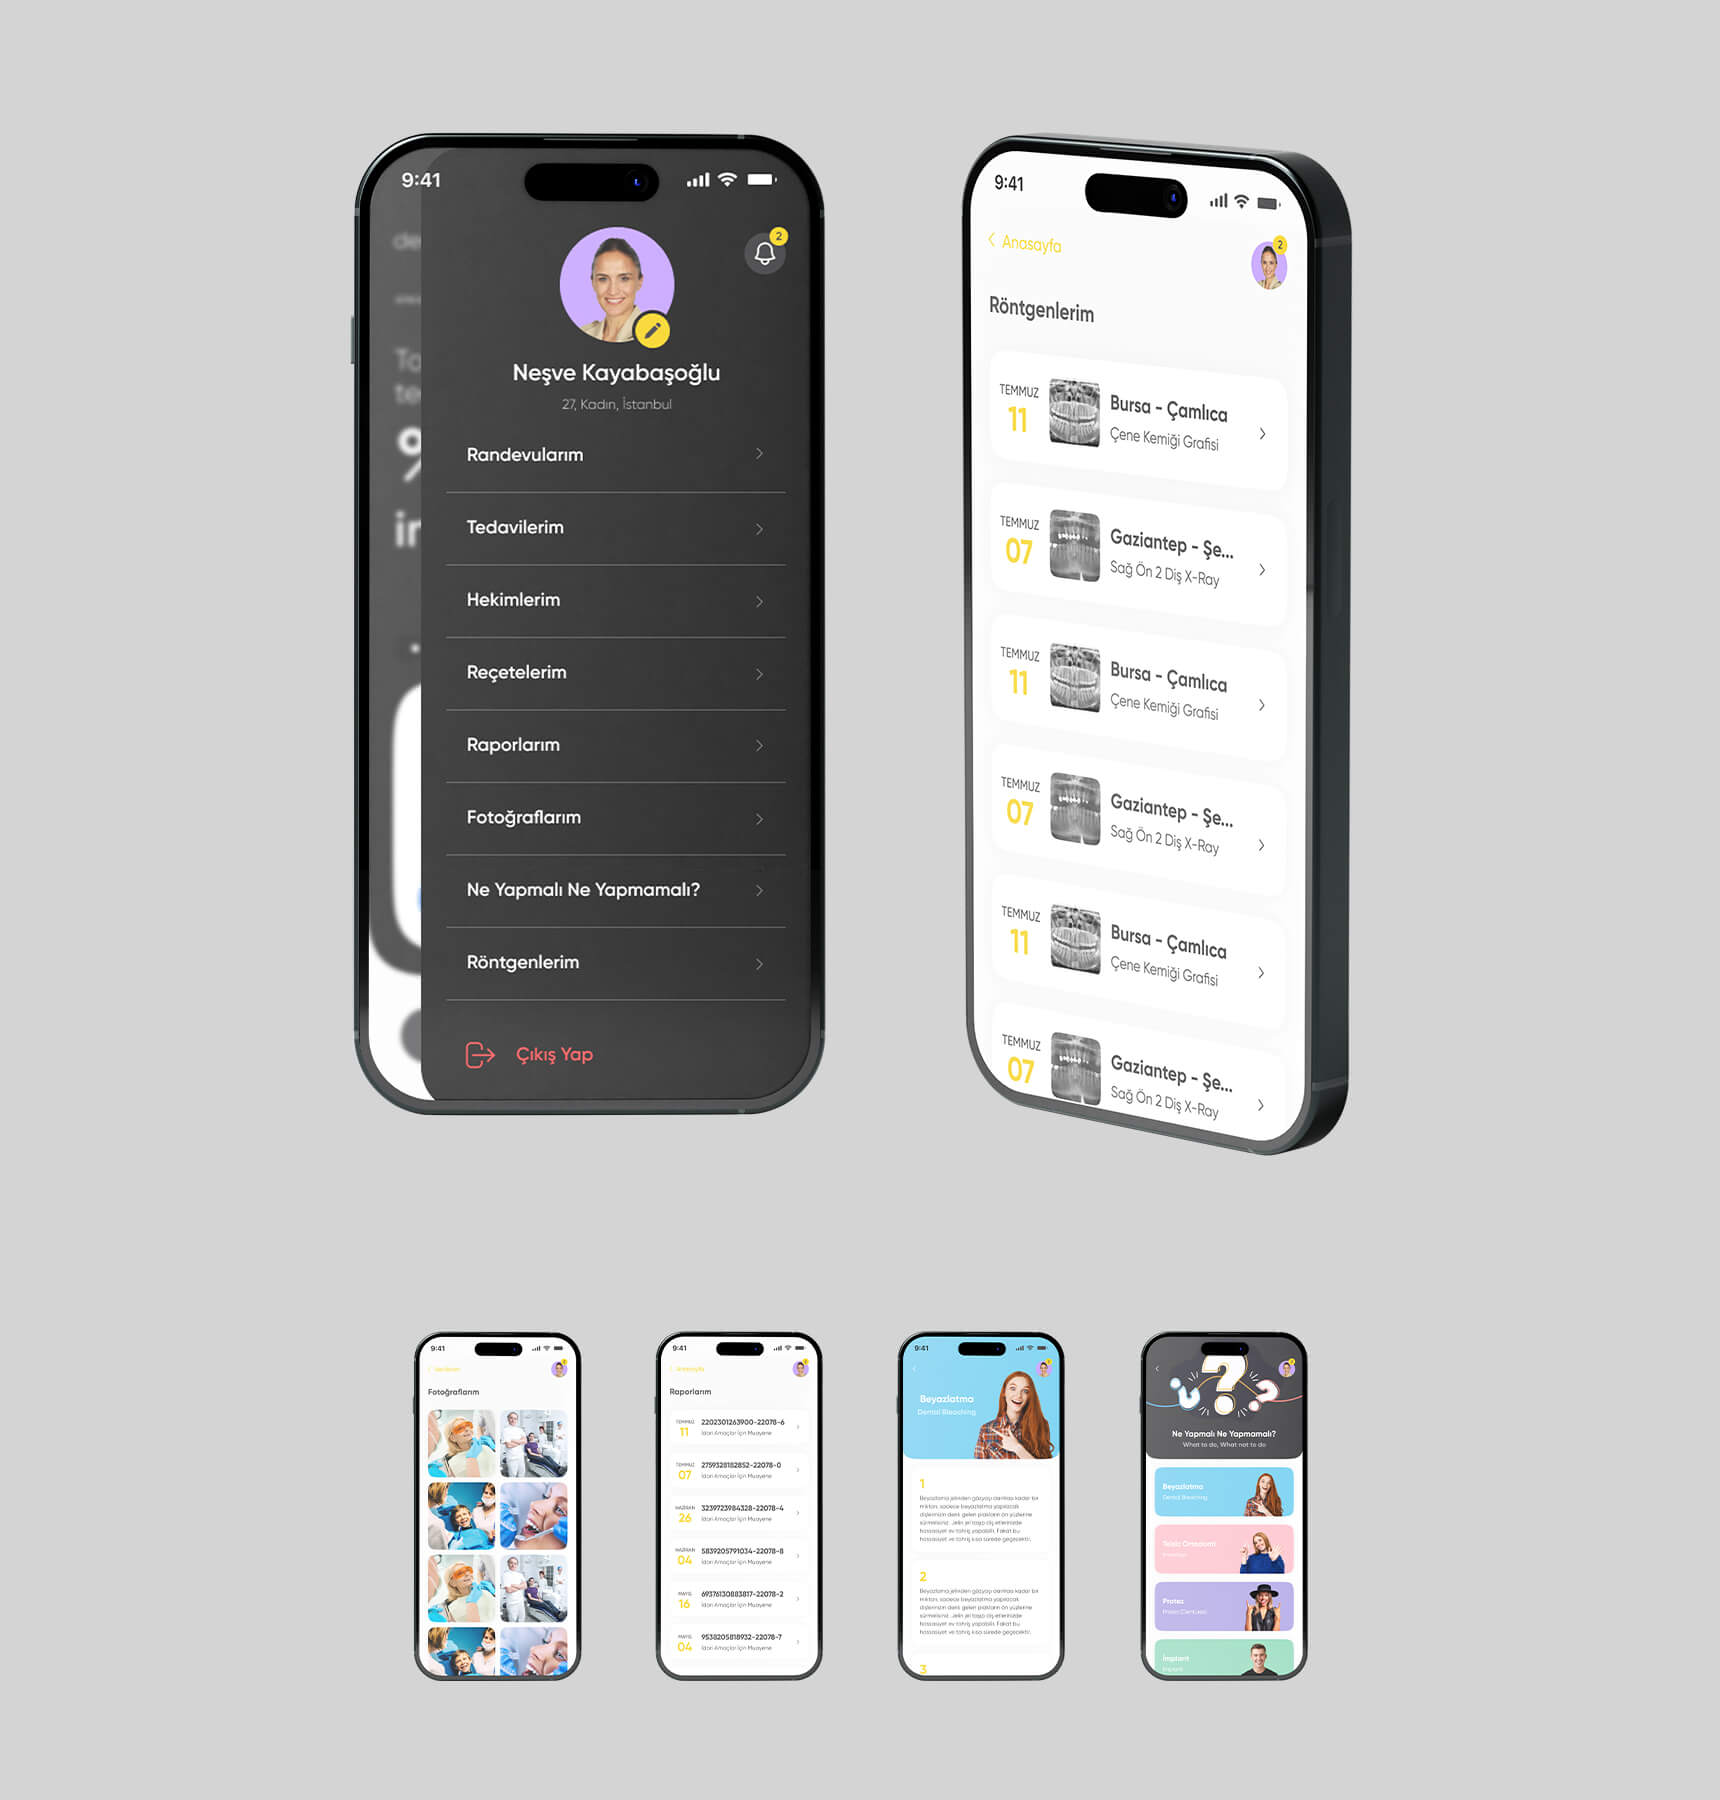 Dent Group-2 - wrinting 1-3 - brand video-5 - home screen-6 - phone-tablet-7 - website-pages-8 - type - color-9 - page screen-10 - home-page-11 - page screen-1-12 - phone-tablet-mockup-13 - phone-screen-14 - laptop mockup-15 - writing-app-16 - app mockup-17 - app-screen-1-18 - app-screen-2